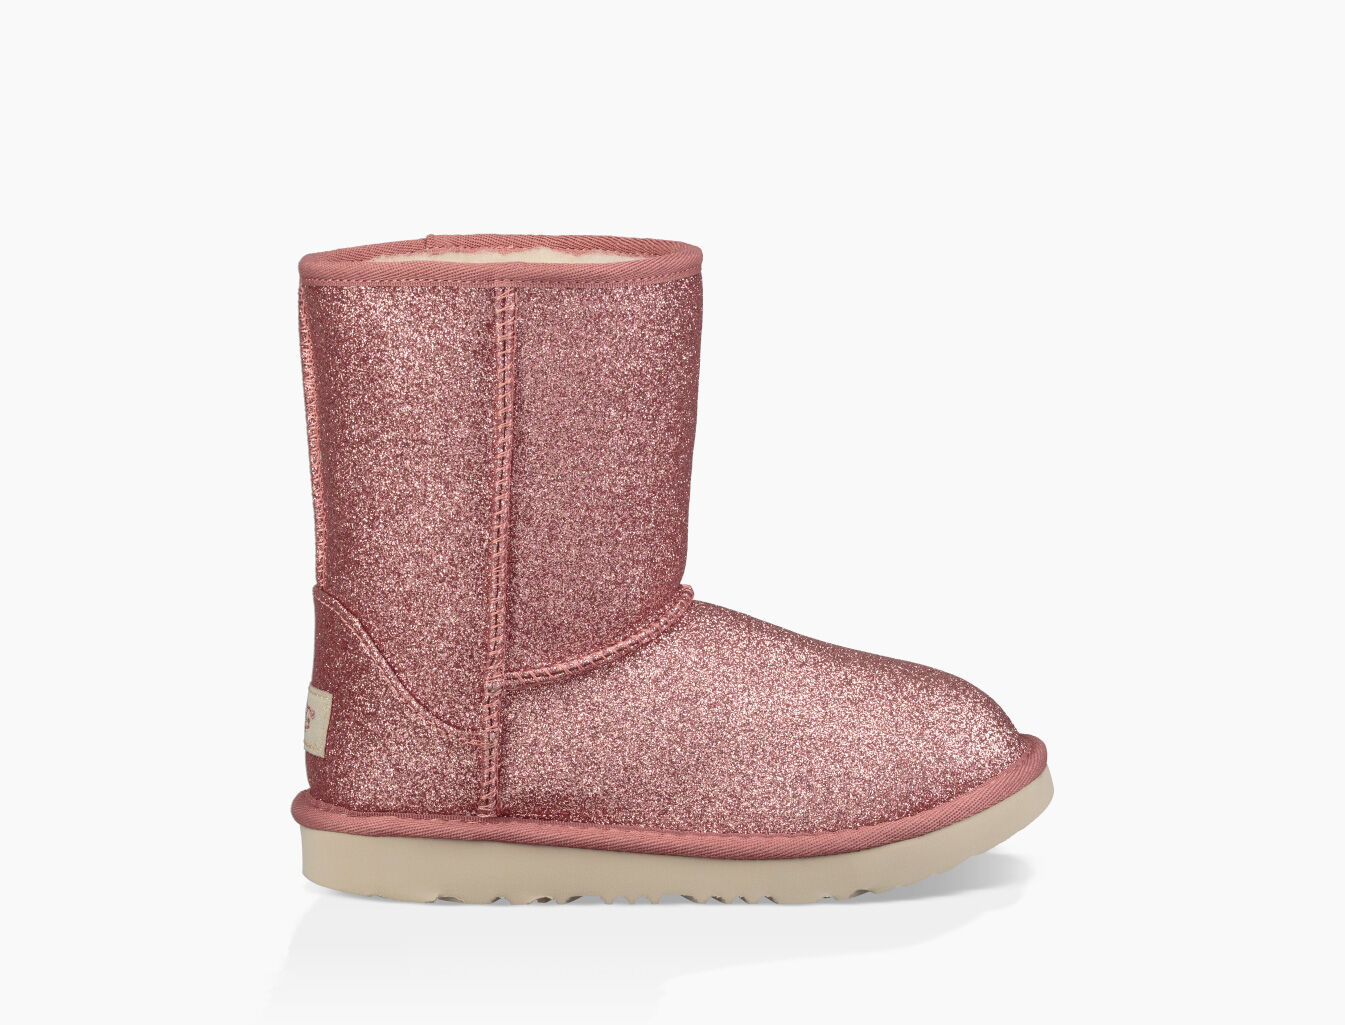 classic ugg sparkle boot